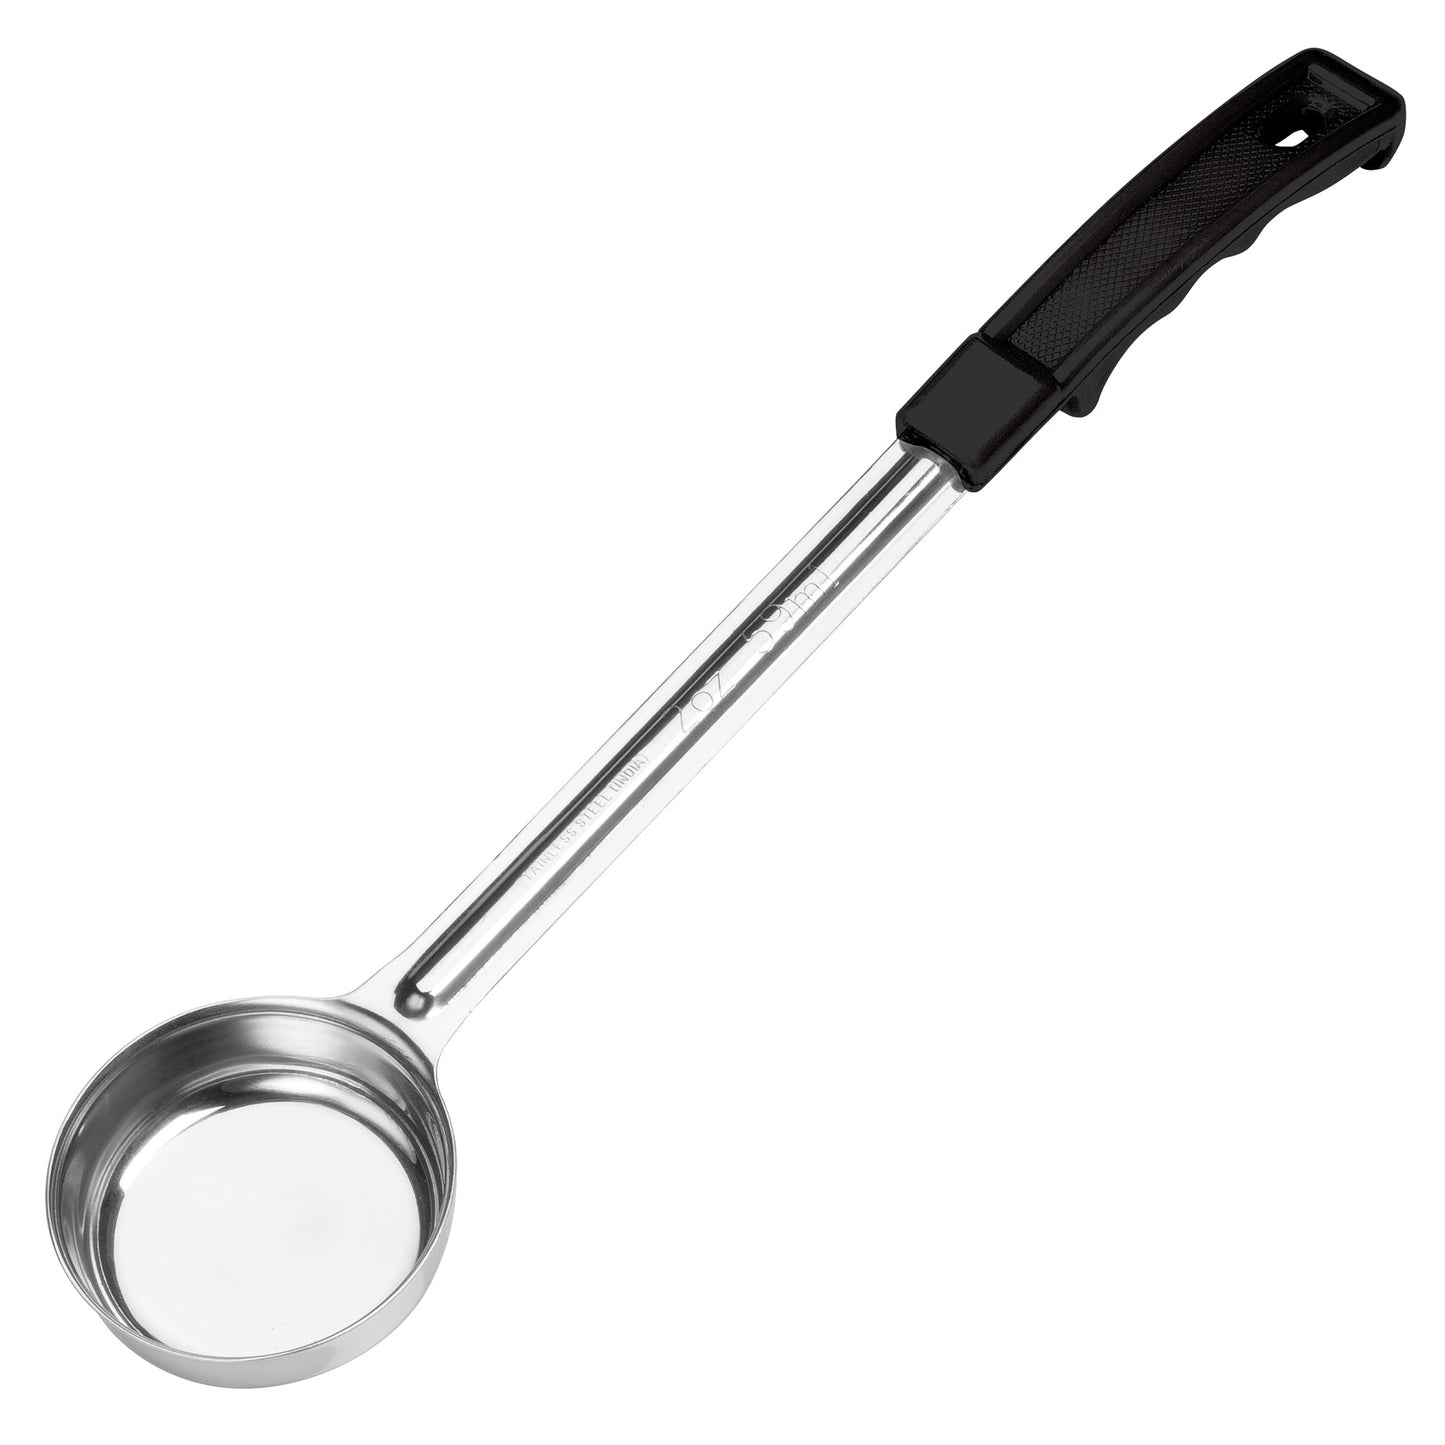 FPSN-1 - Winco Prime One-Piece Stainless Steel Portioners - Solid, 1 oz